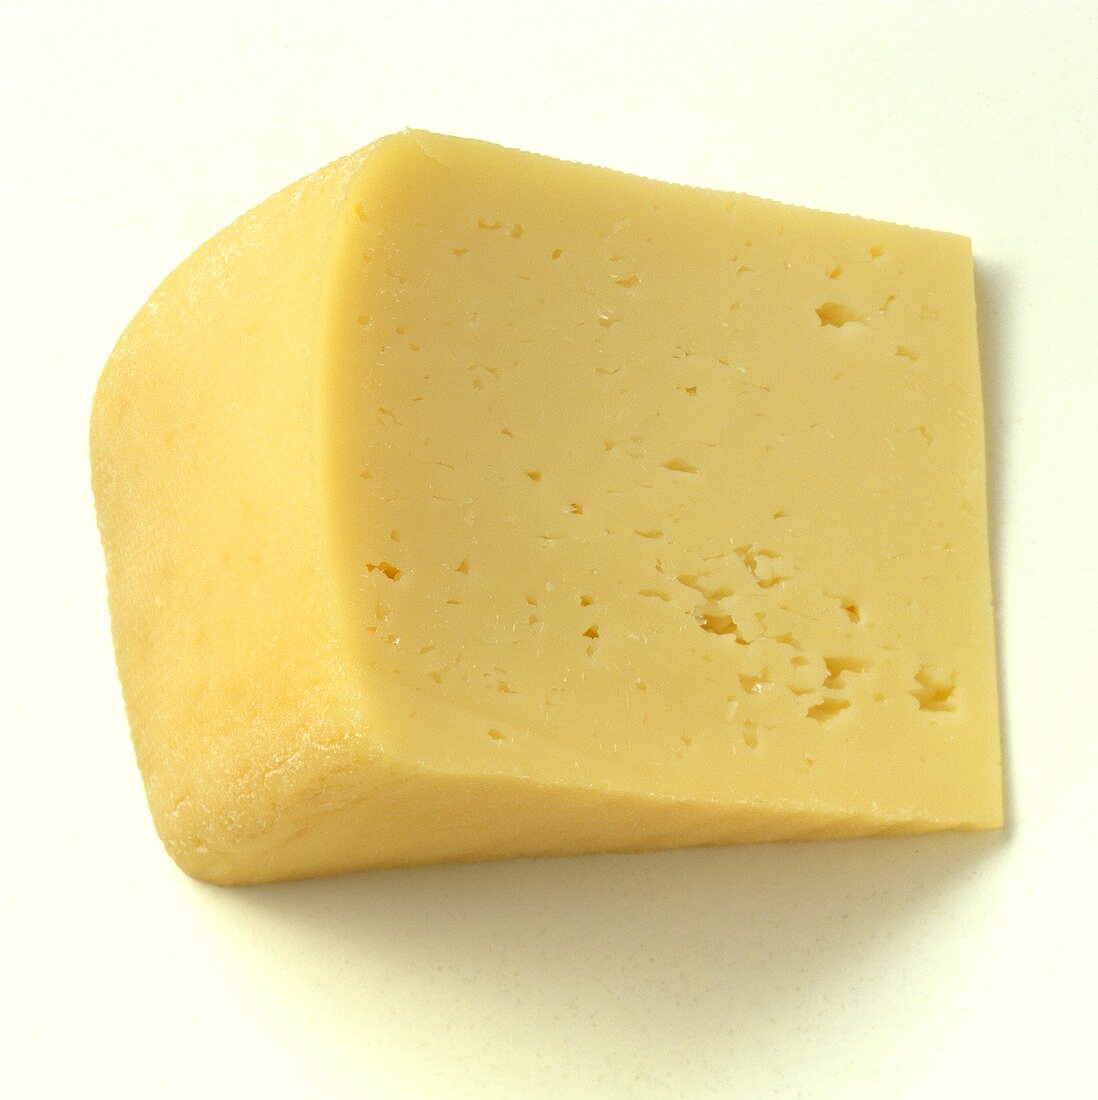 A triangle of Bierkäse (beer cheese) on white background